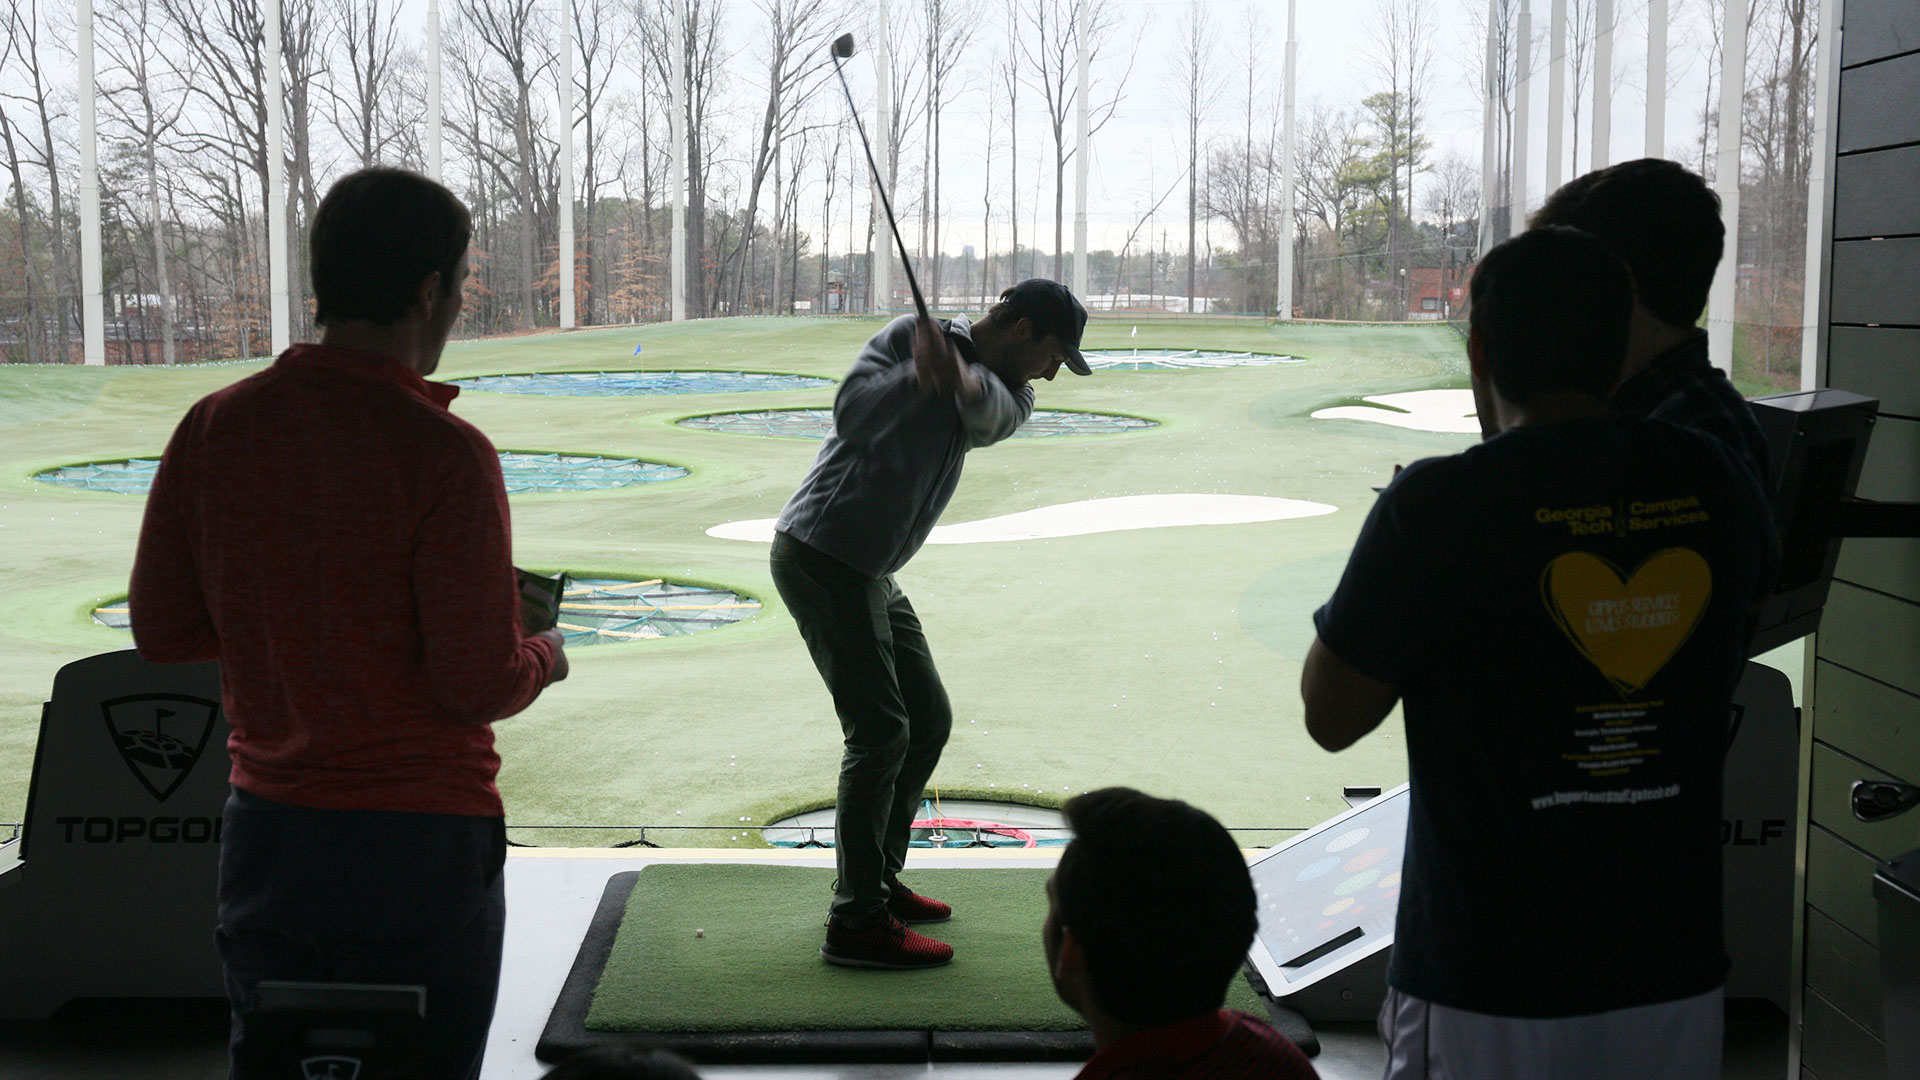 photo - group of students watching a fellow student at golf driving range